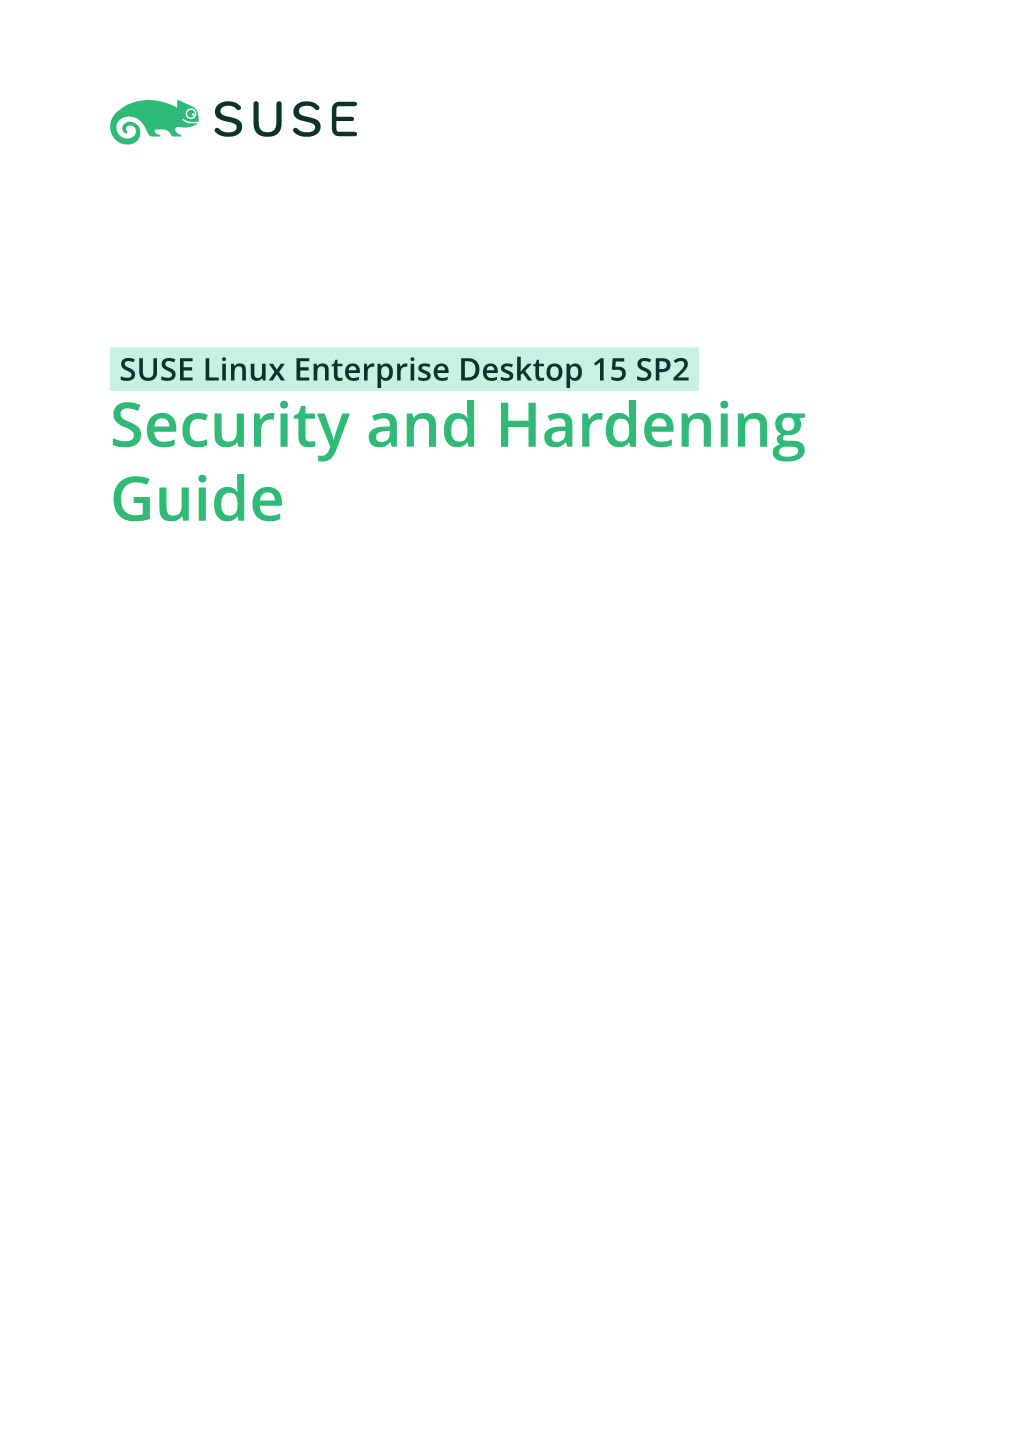 Security and Hardening Guide Security and Hardening Guide SUSE Linux Enterprise Desktop 15 SP2